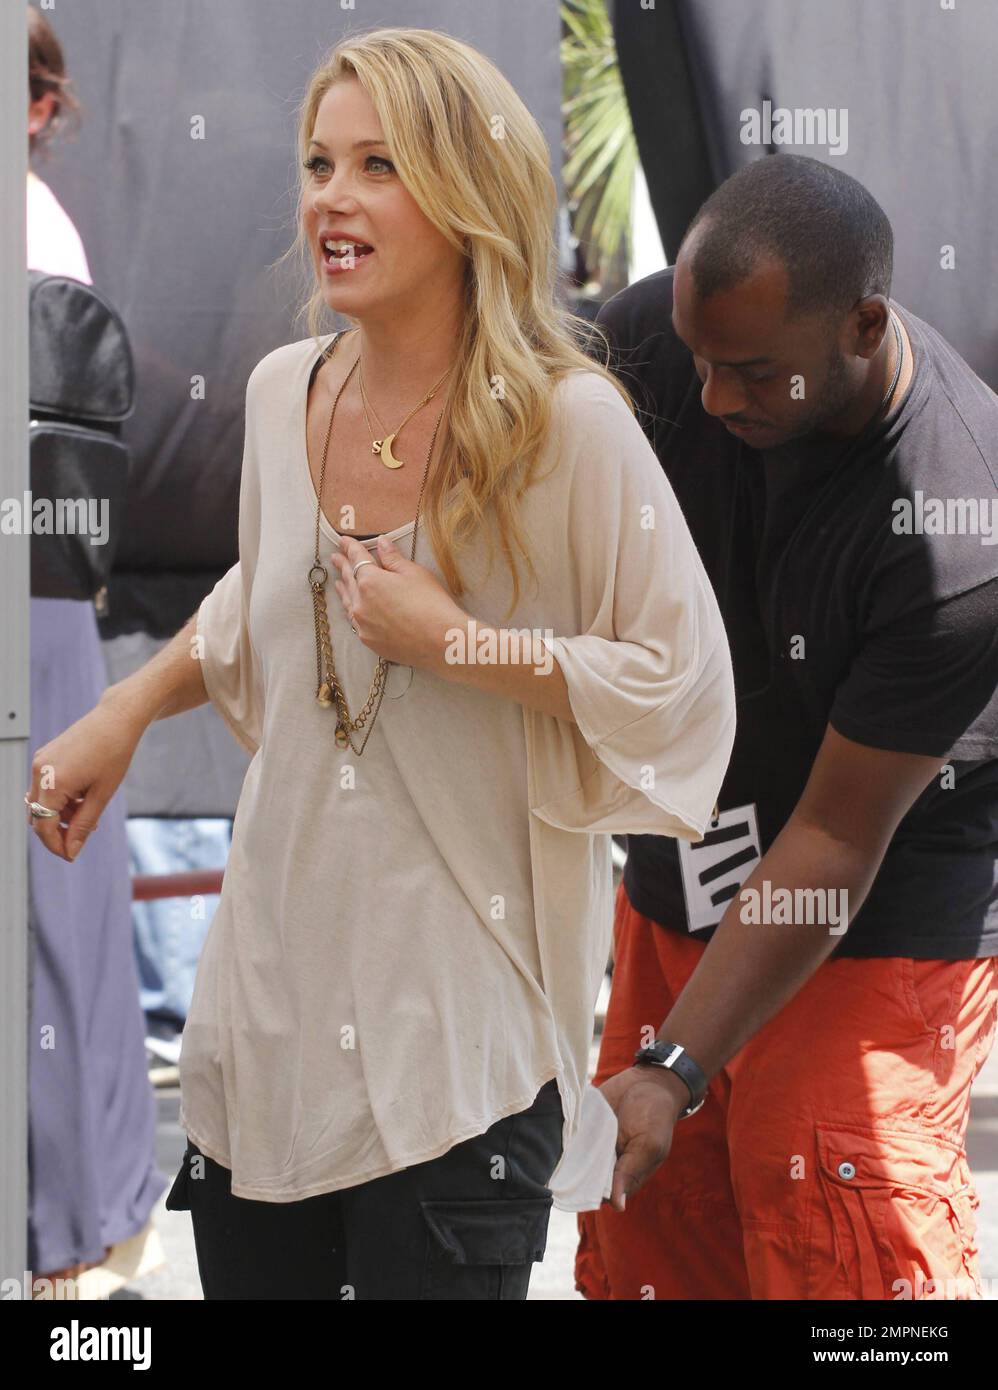 Wearing a loose tan top with black skinny jeans and sandals, Christina  Applegate was spotted at the Grove shopping center where she made an  appearance on 'Extra' tv program with host Mario